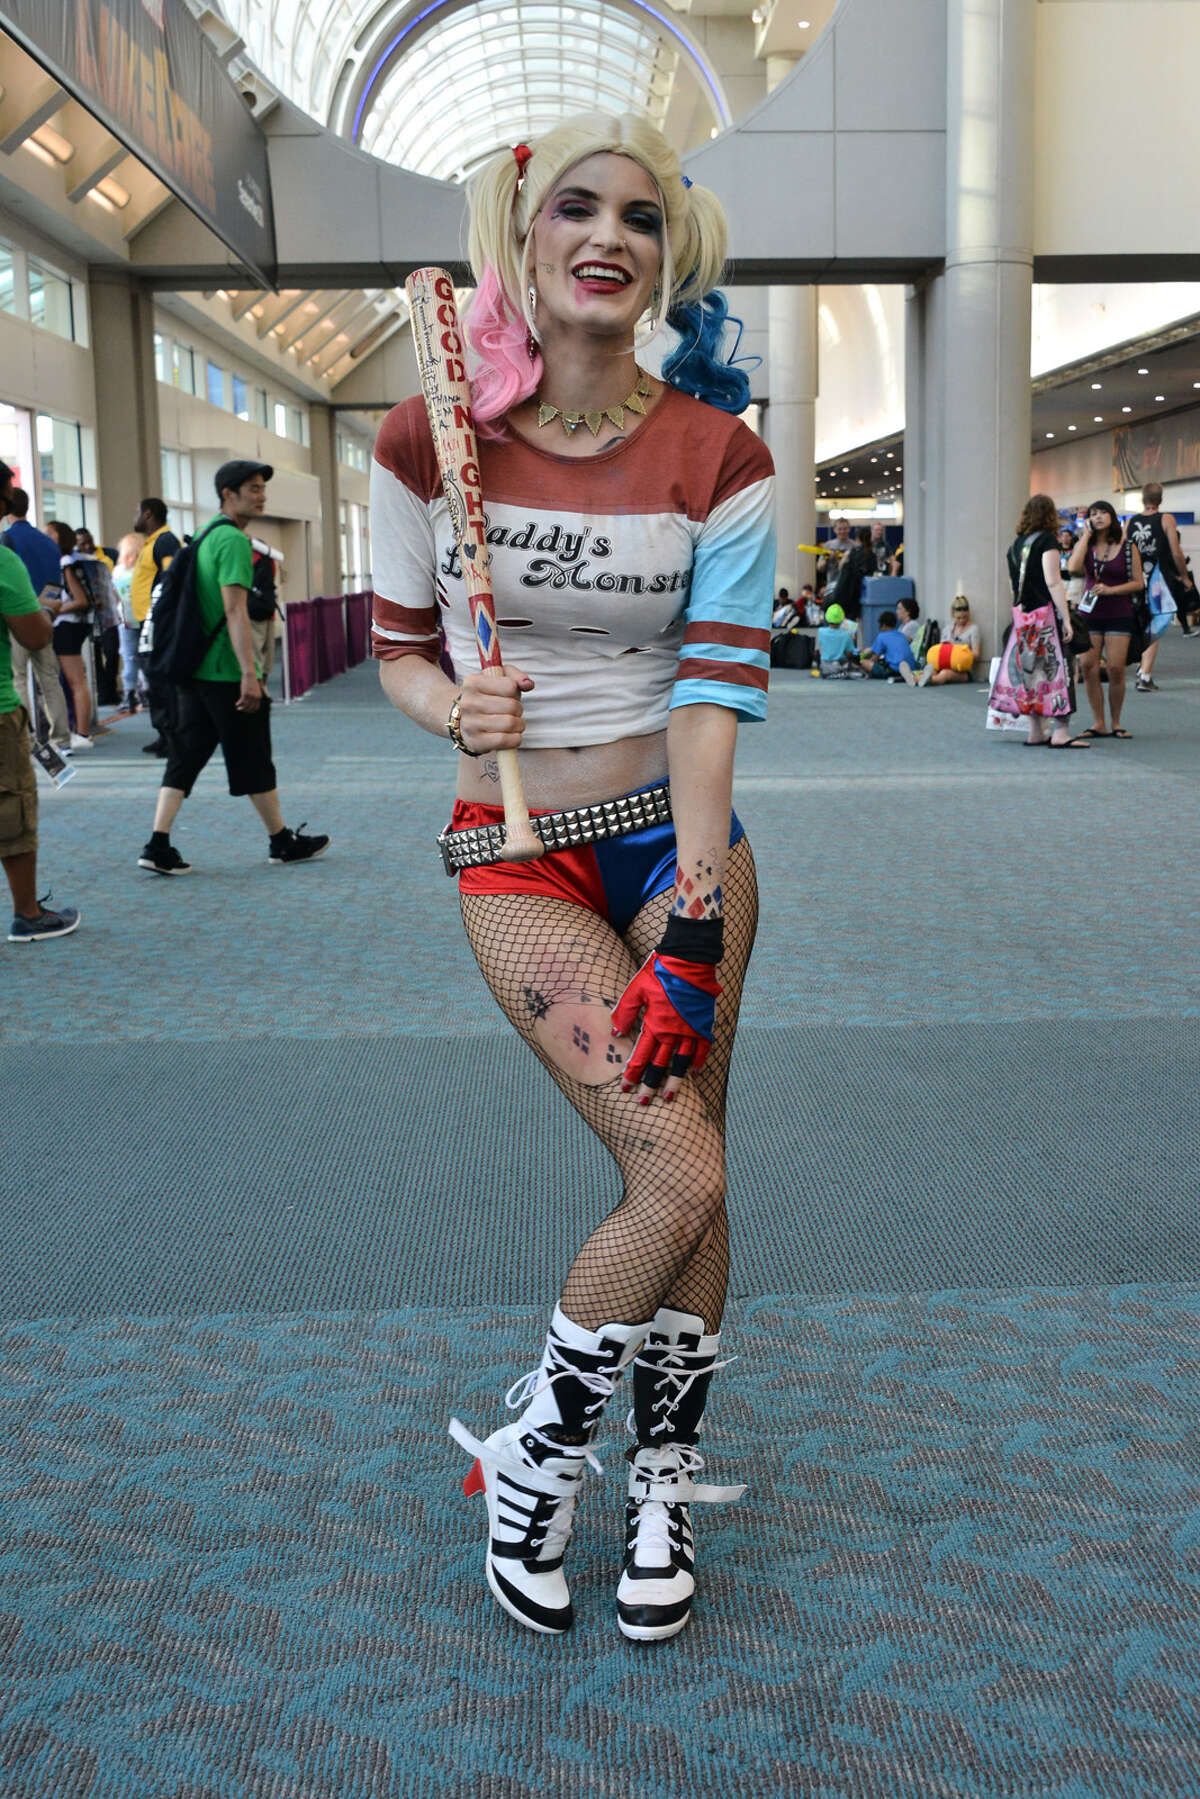 SAN DIEGO - HARLEY QUINN:A Costume Cosplay Attendee attends Comic-Con International 2016 on July 20, 2016 in San Diego, Calif.